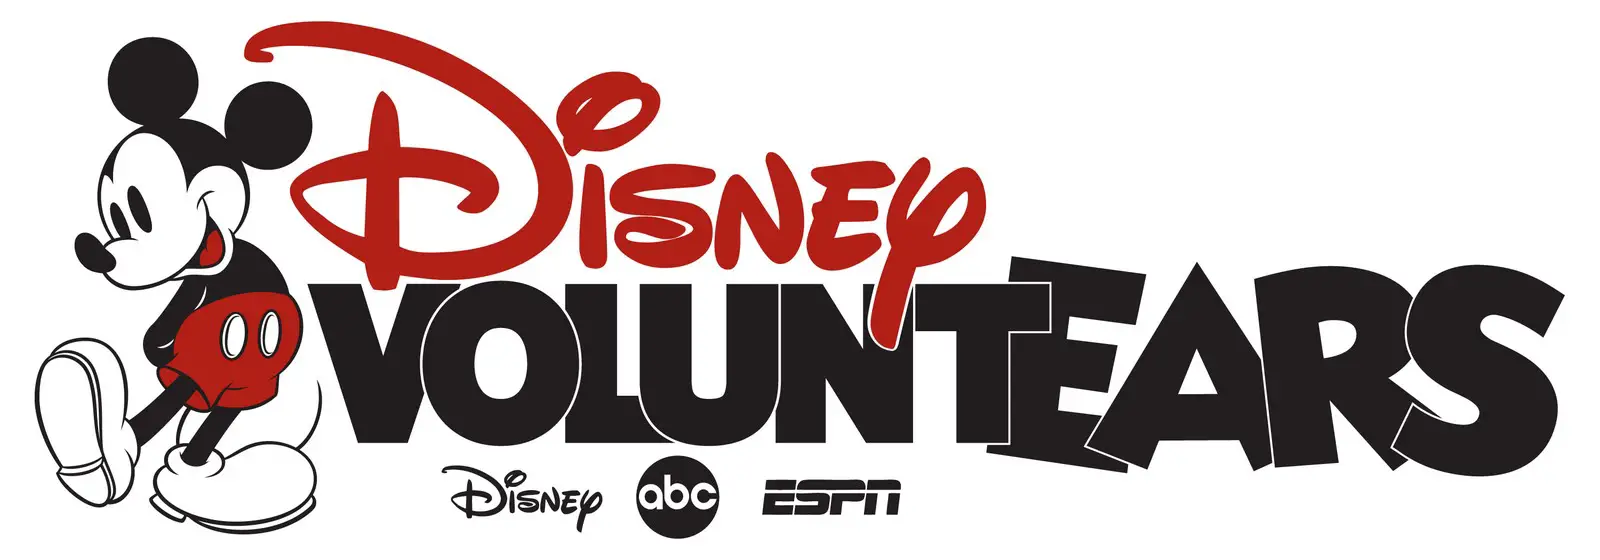 Disneyland Resort Castmembers give back to their communities in many ways